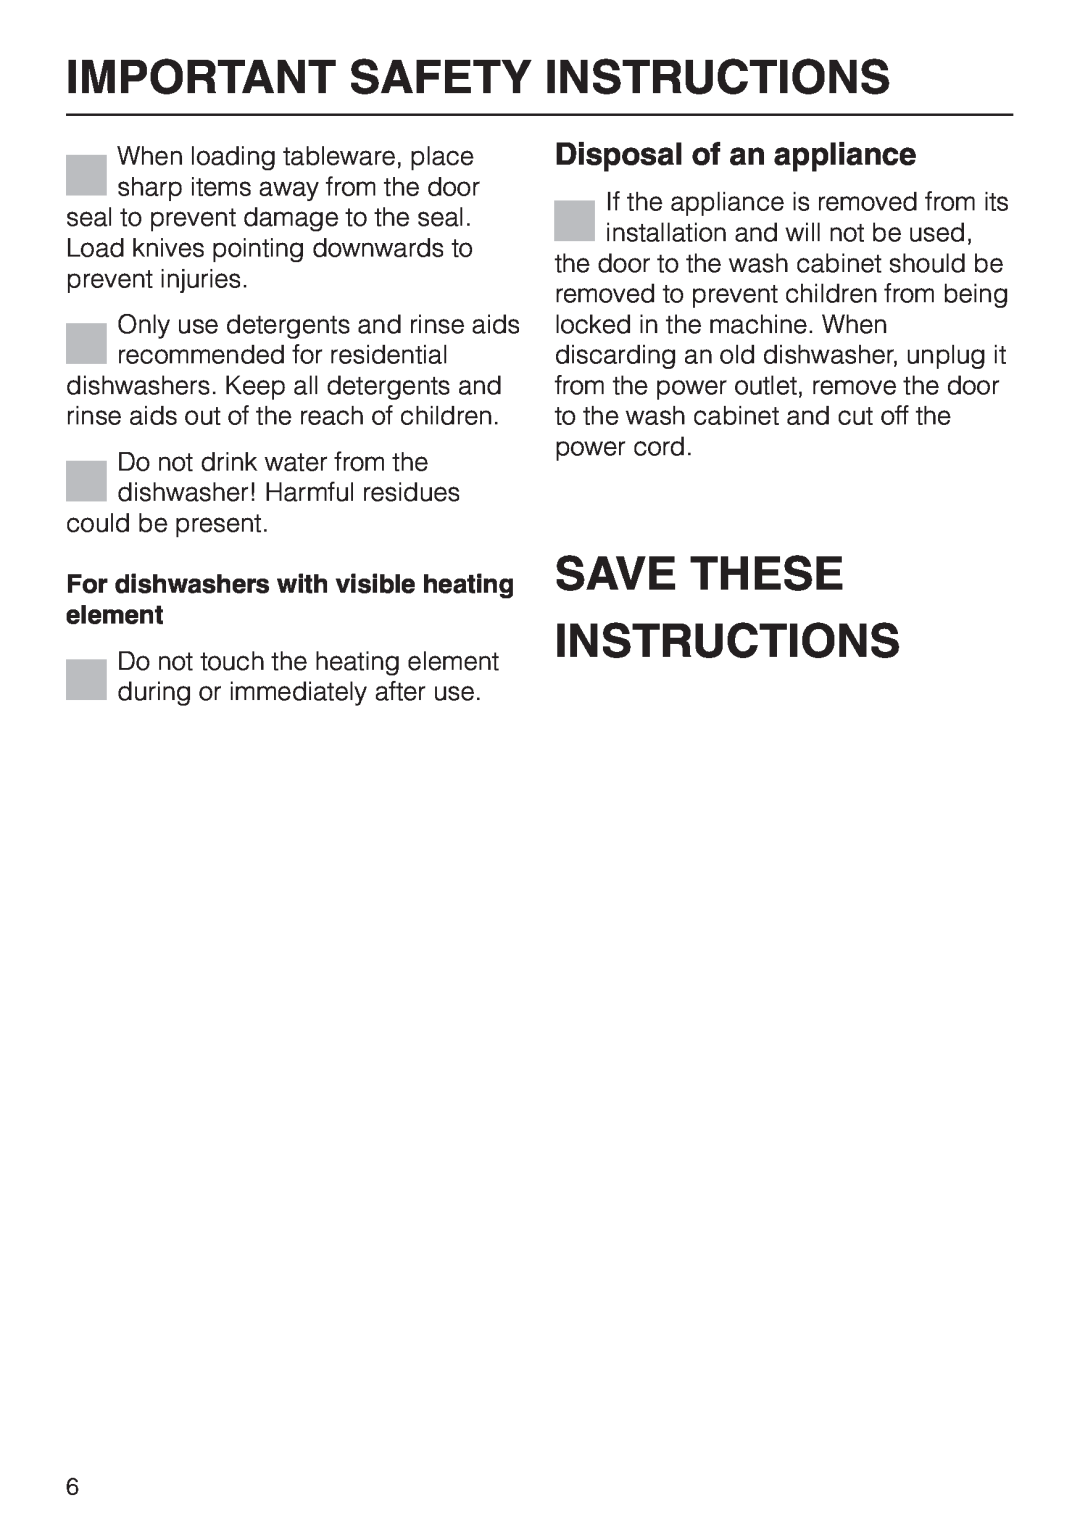 Miele G 858 SCVI, G 658 SCVI Save These Instructions, Disposal of an appliance, Important Safety Instructions 